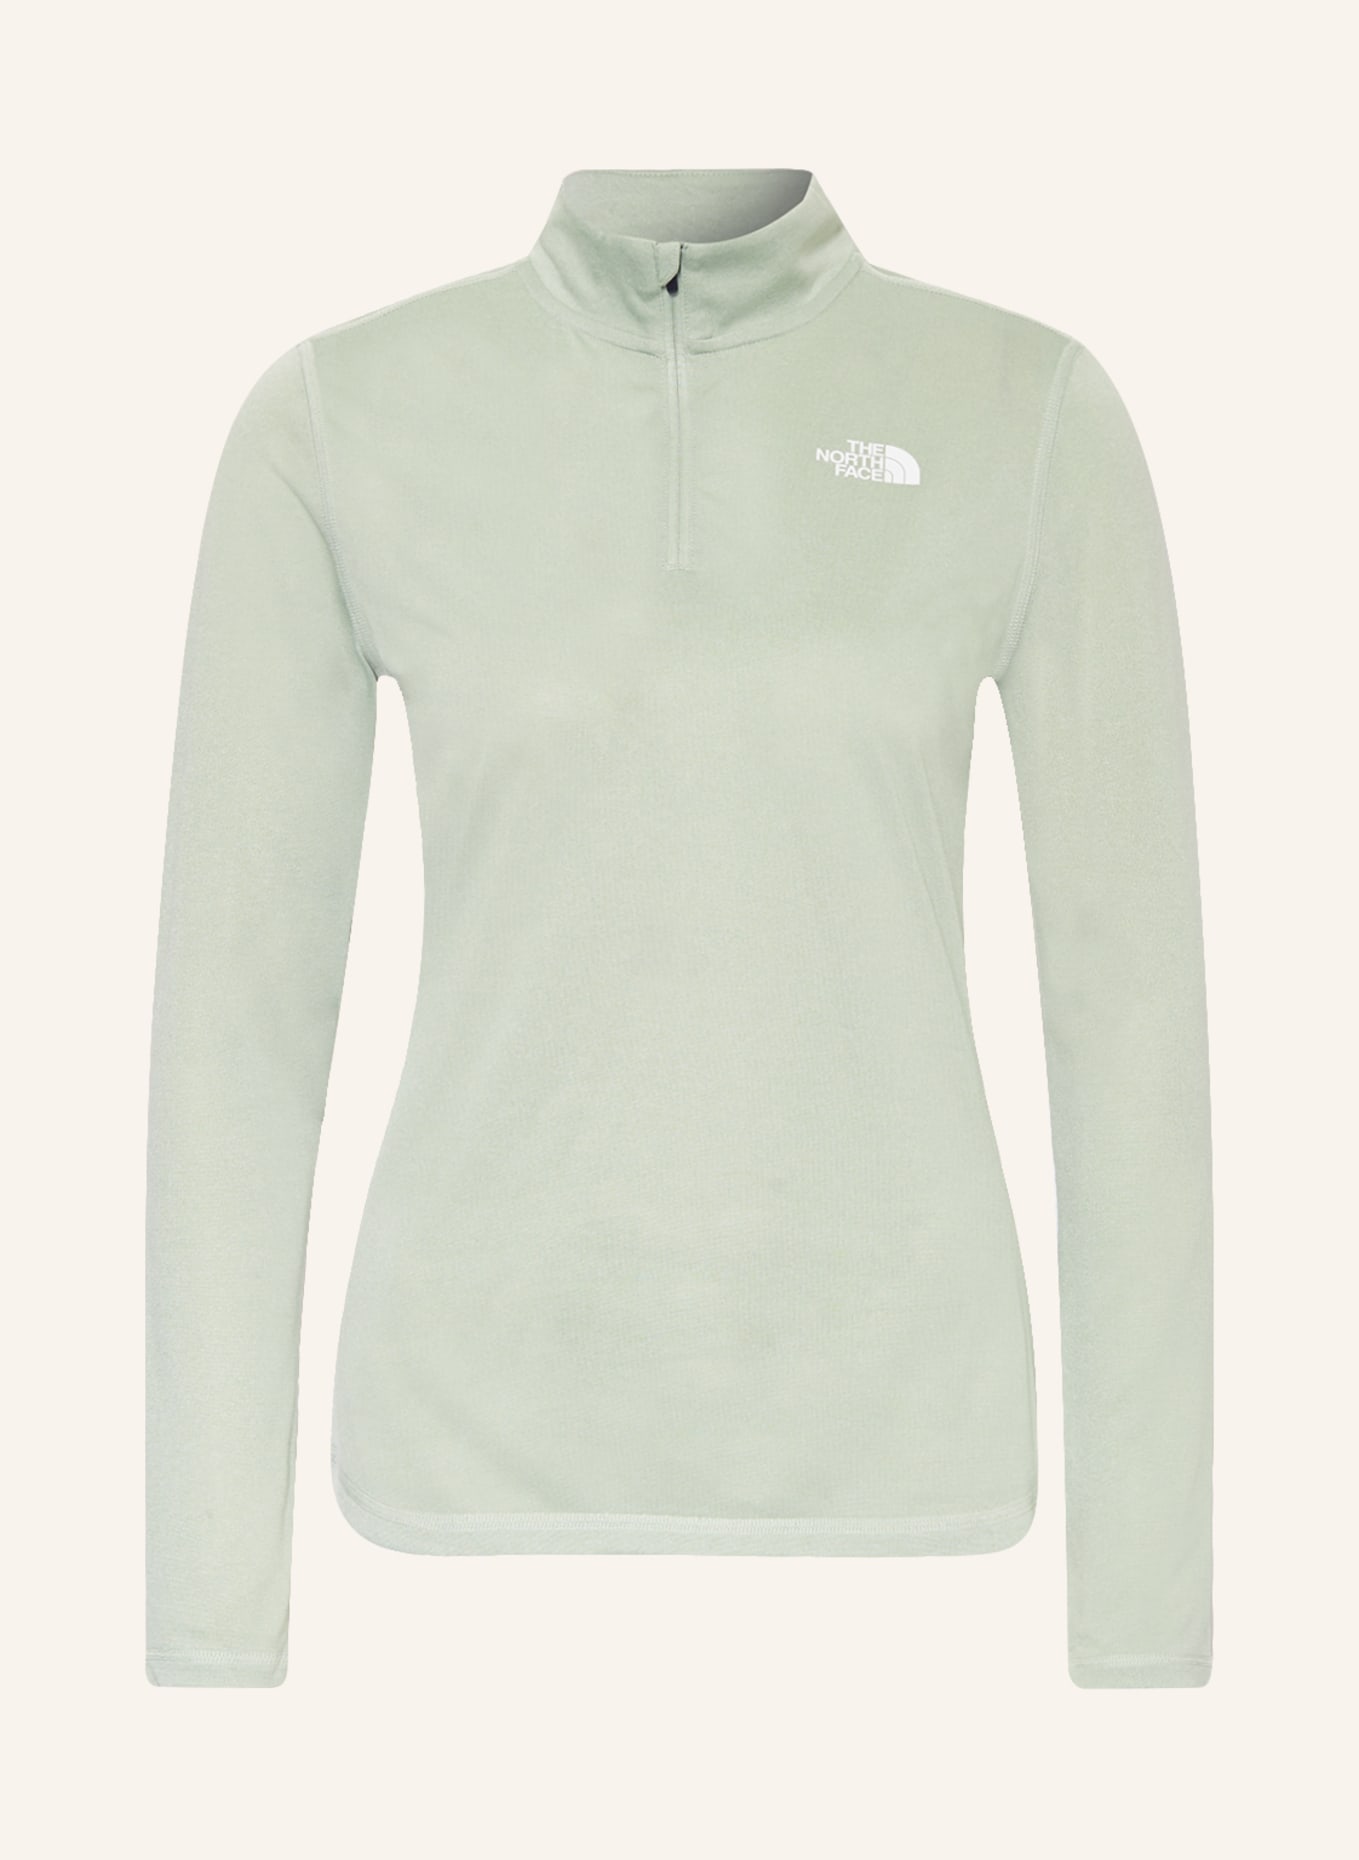 THE NORTH FACE Undershirt FLEX, Color: LIGHT GREEN (Image 1)